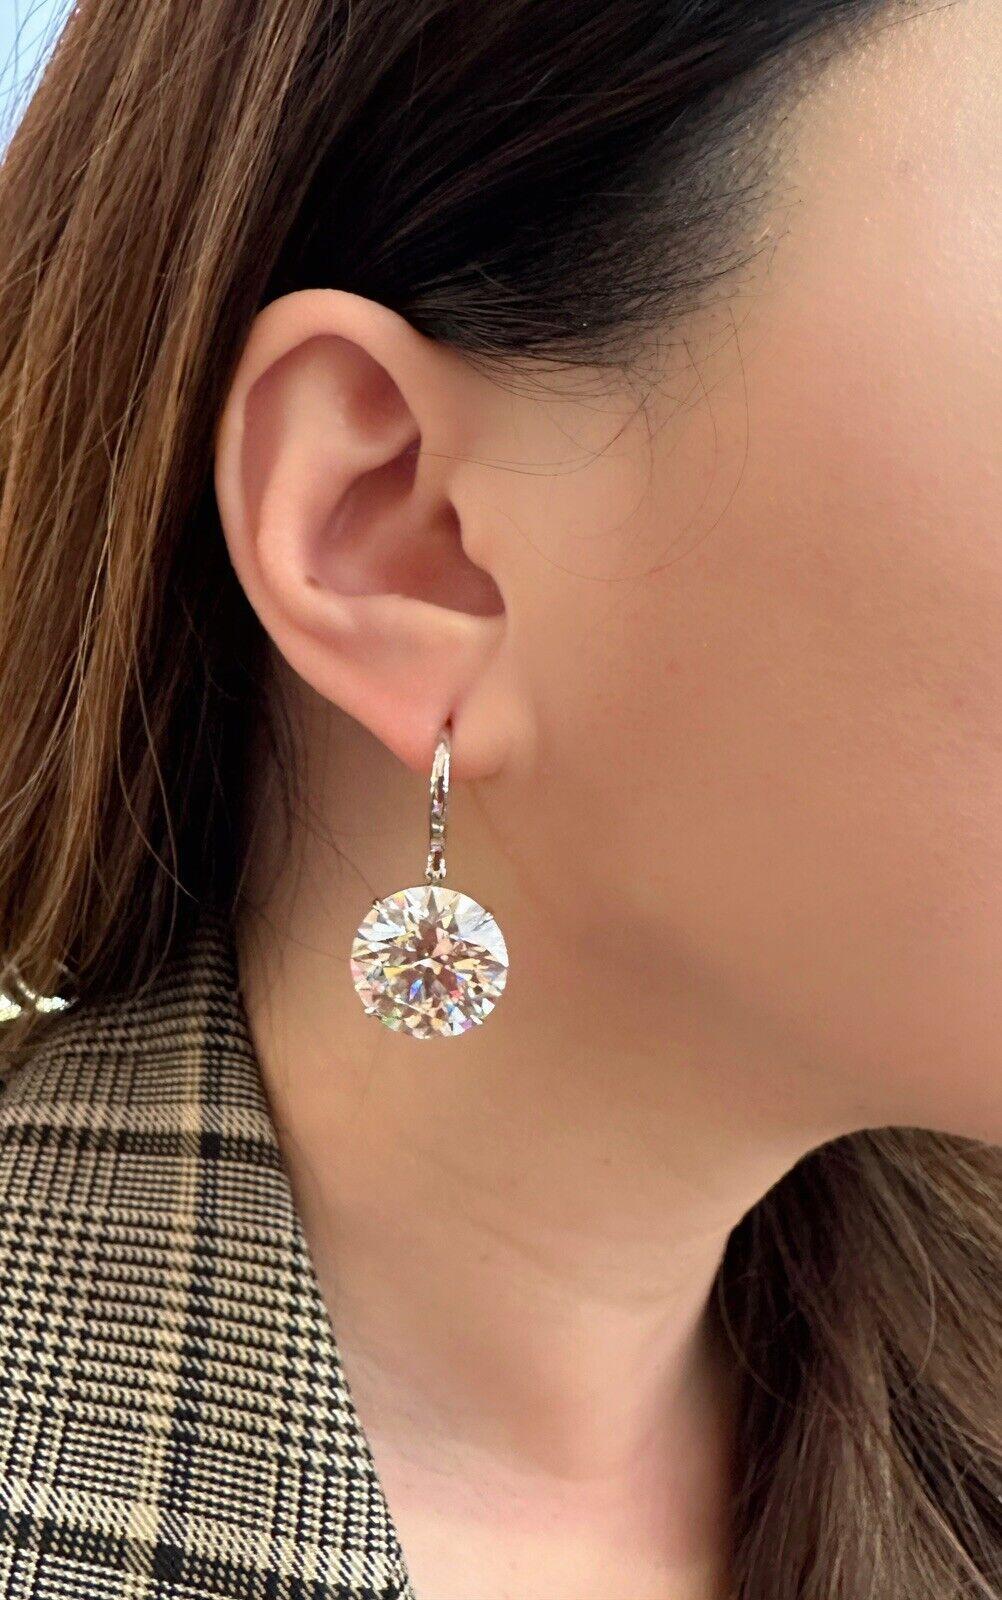 GIA Certified 
20.63 & 21.17 carat Round Brilliant Diamond 
Drop Earrings in 18k White Gold

Features
21.17 carat; L color & VS1 clarity
20.63 carat; O-P Range color & SI1 clarity

GIA Certified
with laser inscribed GIA number on each stone
( See